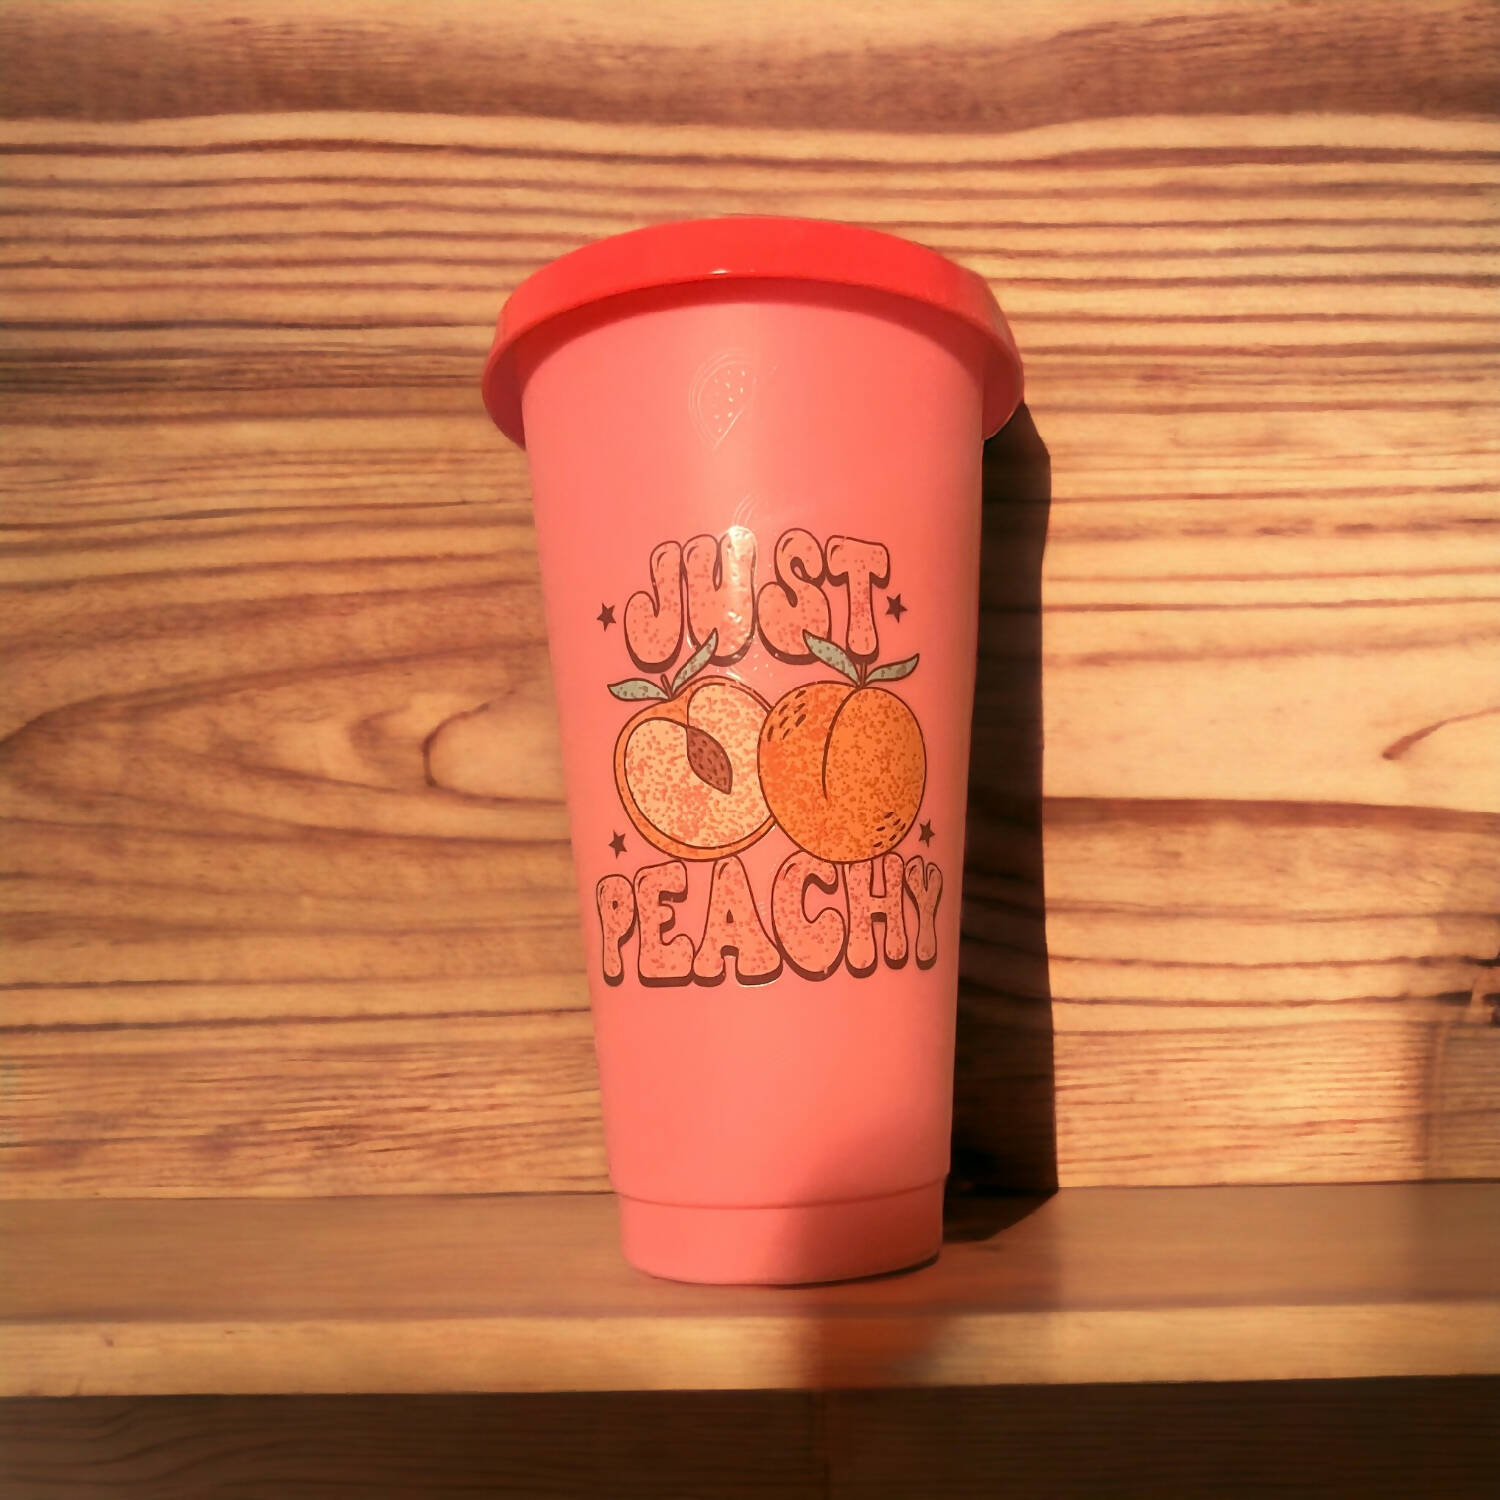 Just peachy plastic cup